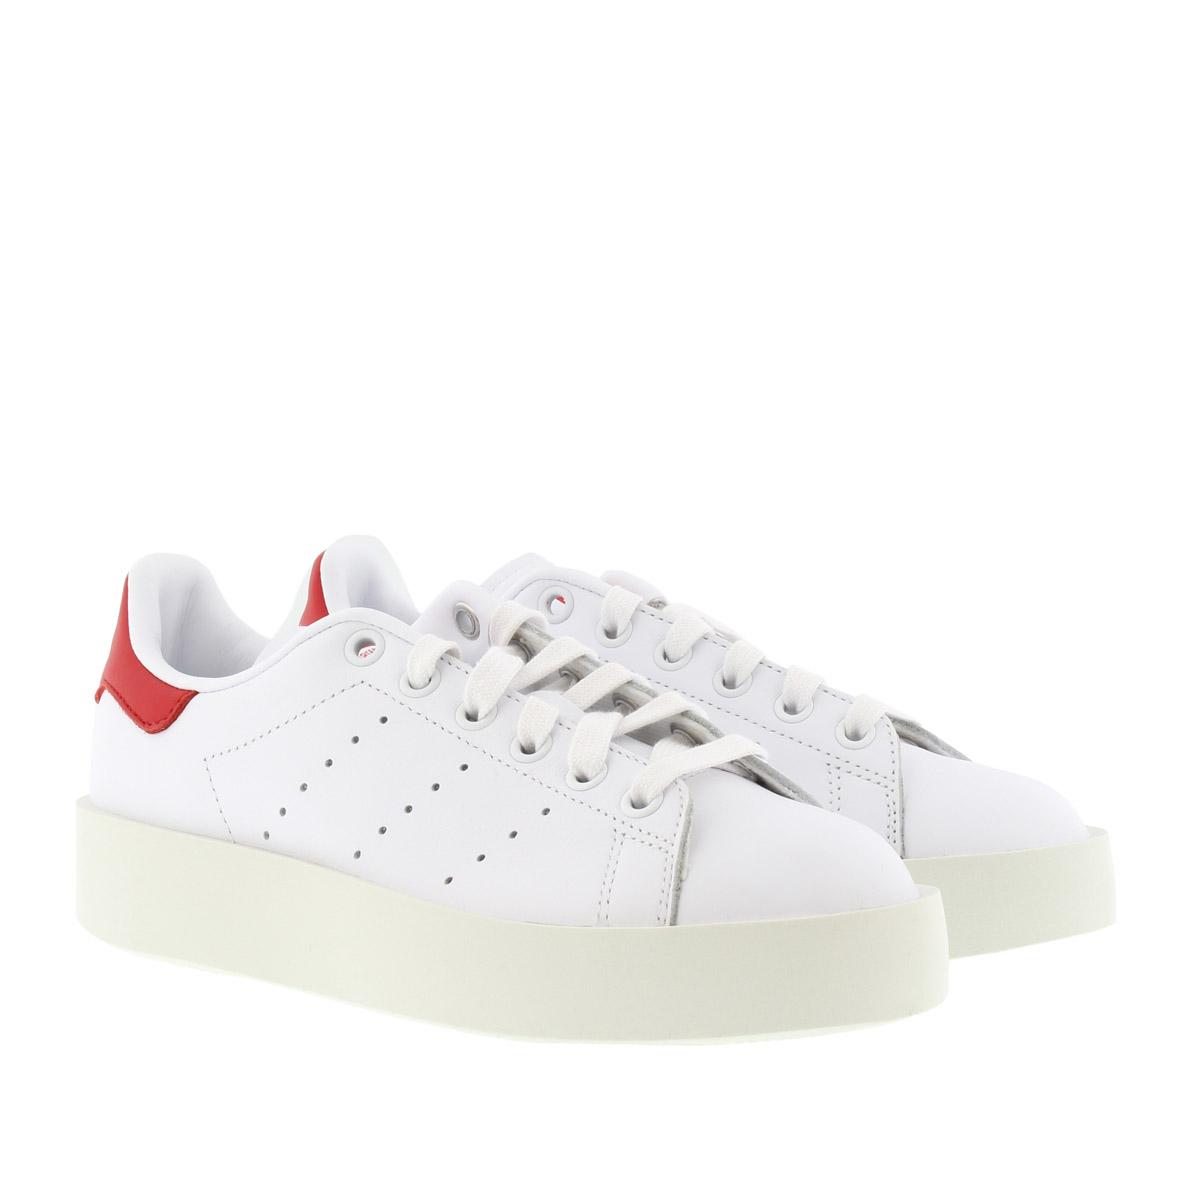 buy > adidas stan smith bold white red, Up to 72% OFF